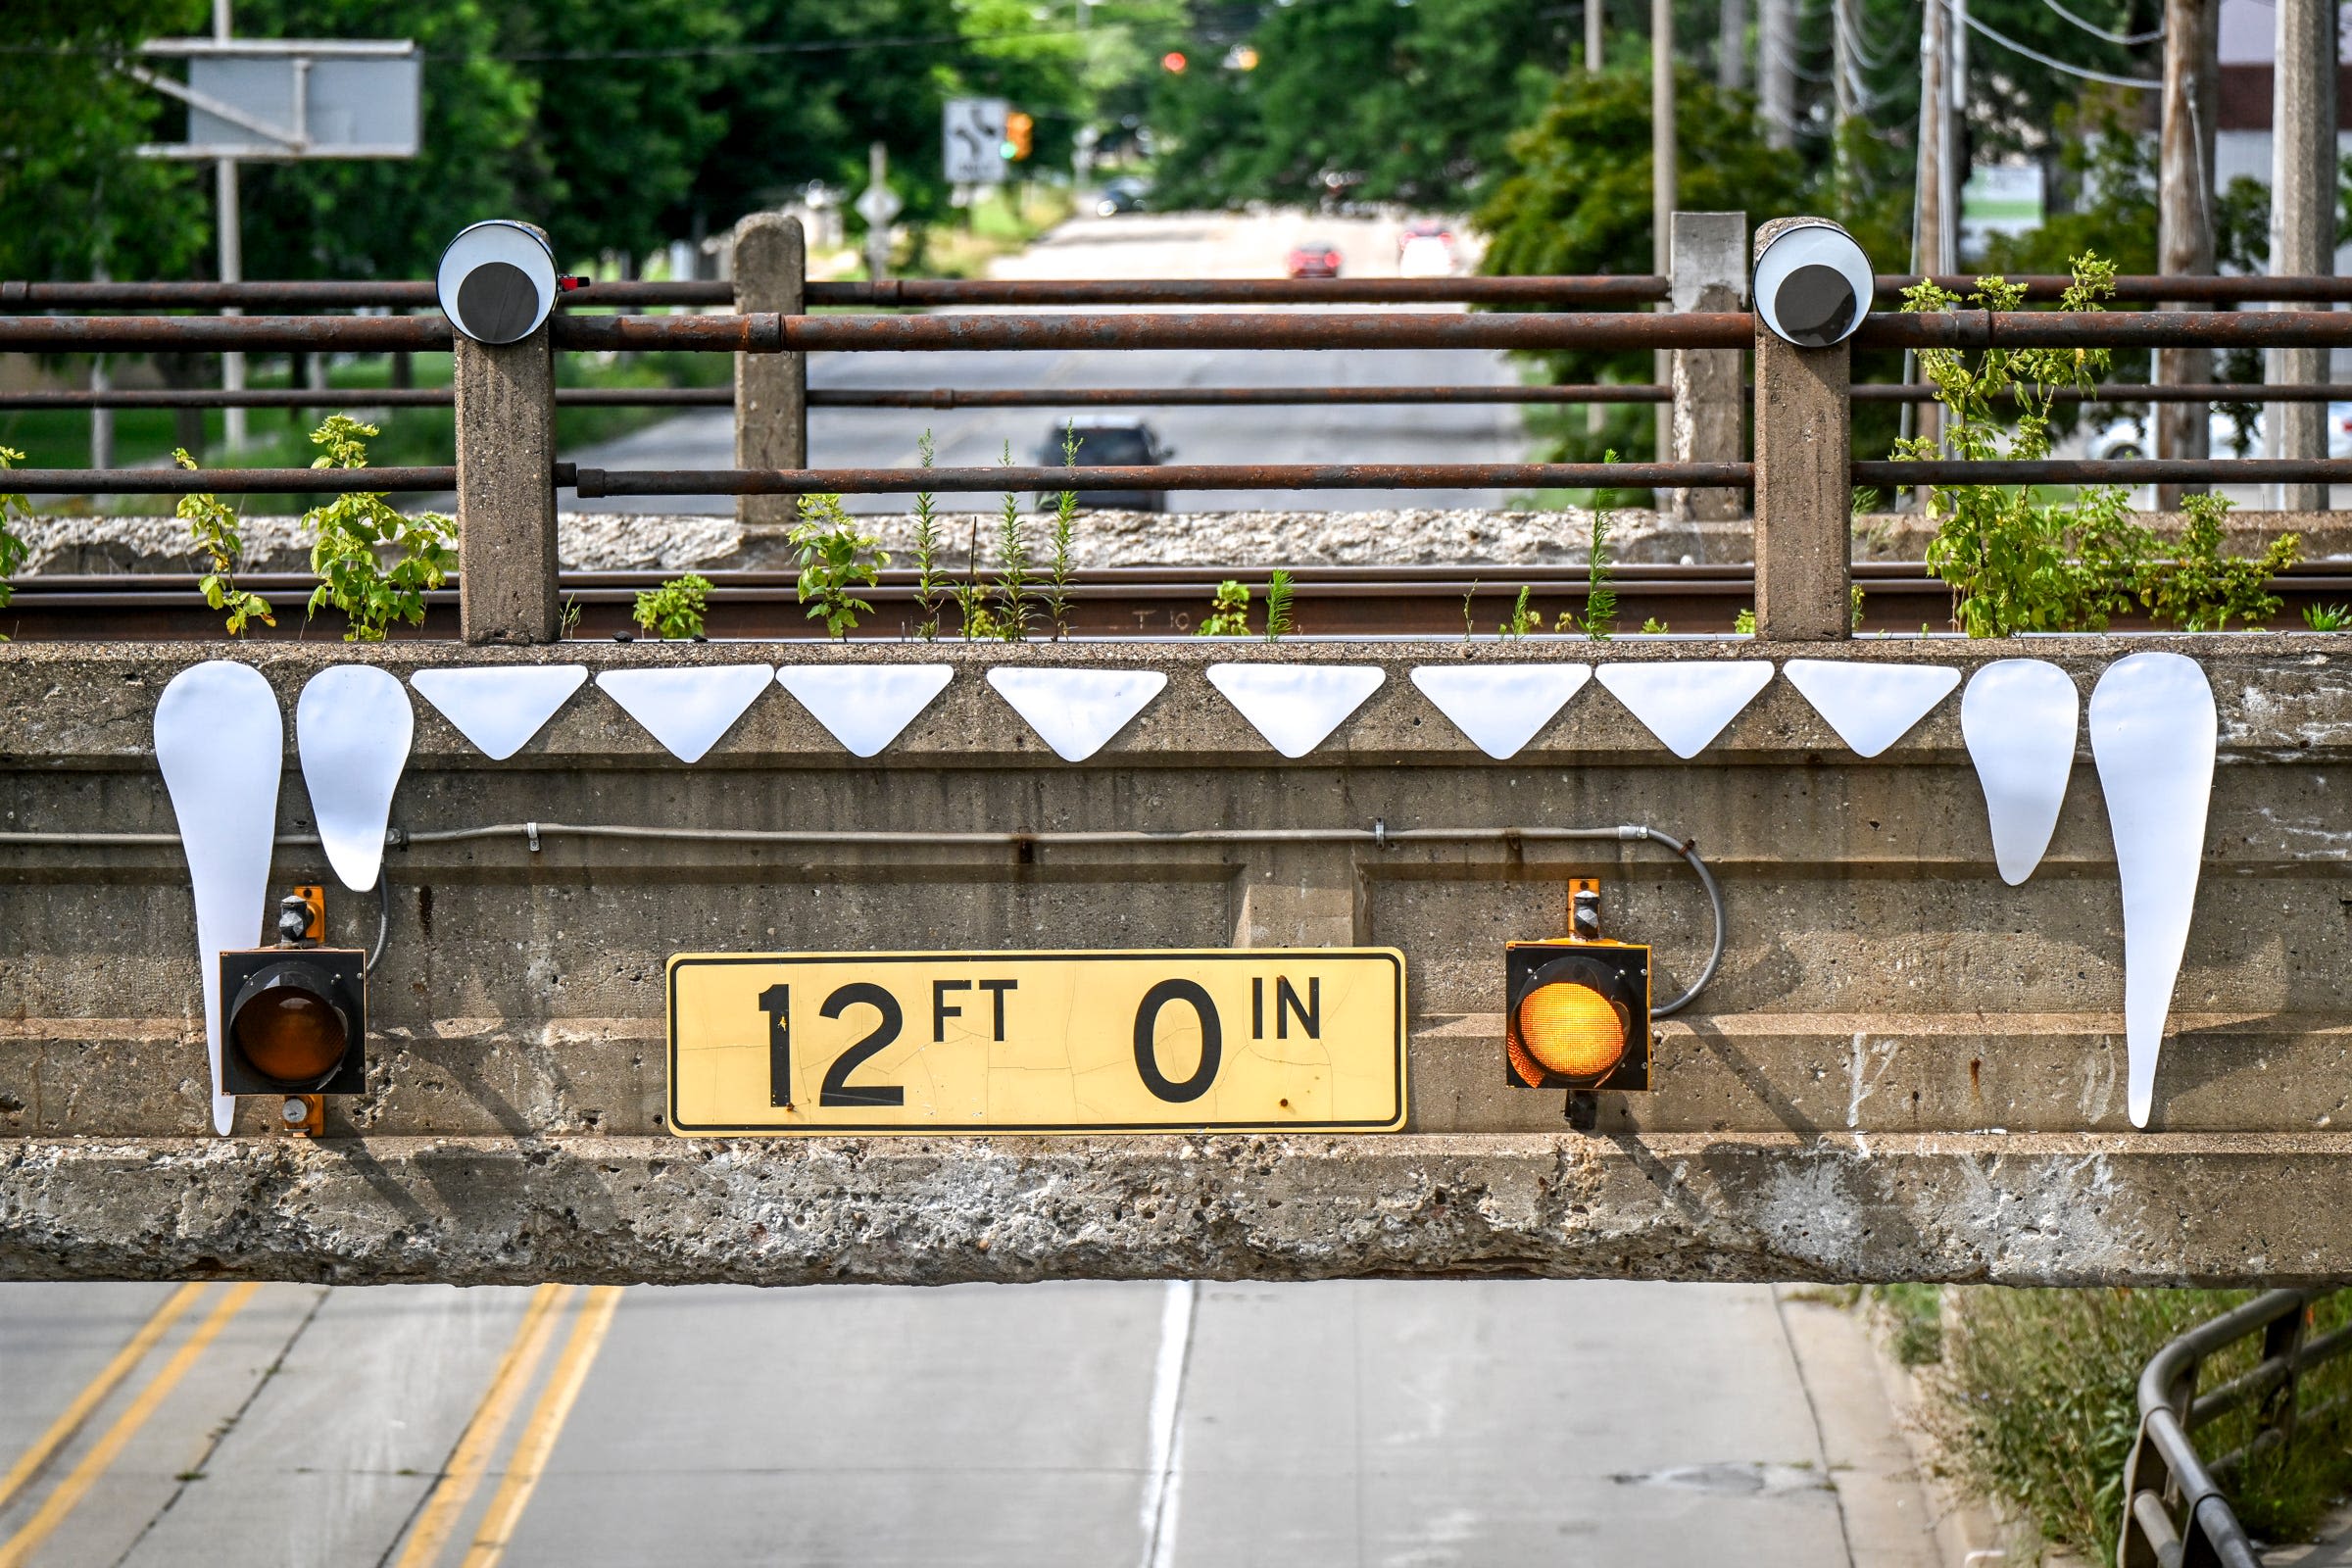 Sinister-looking Pennsylvania Avenue bridge receives its due from Google